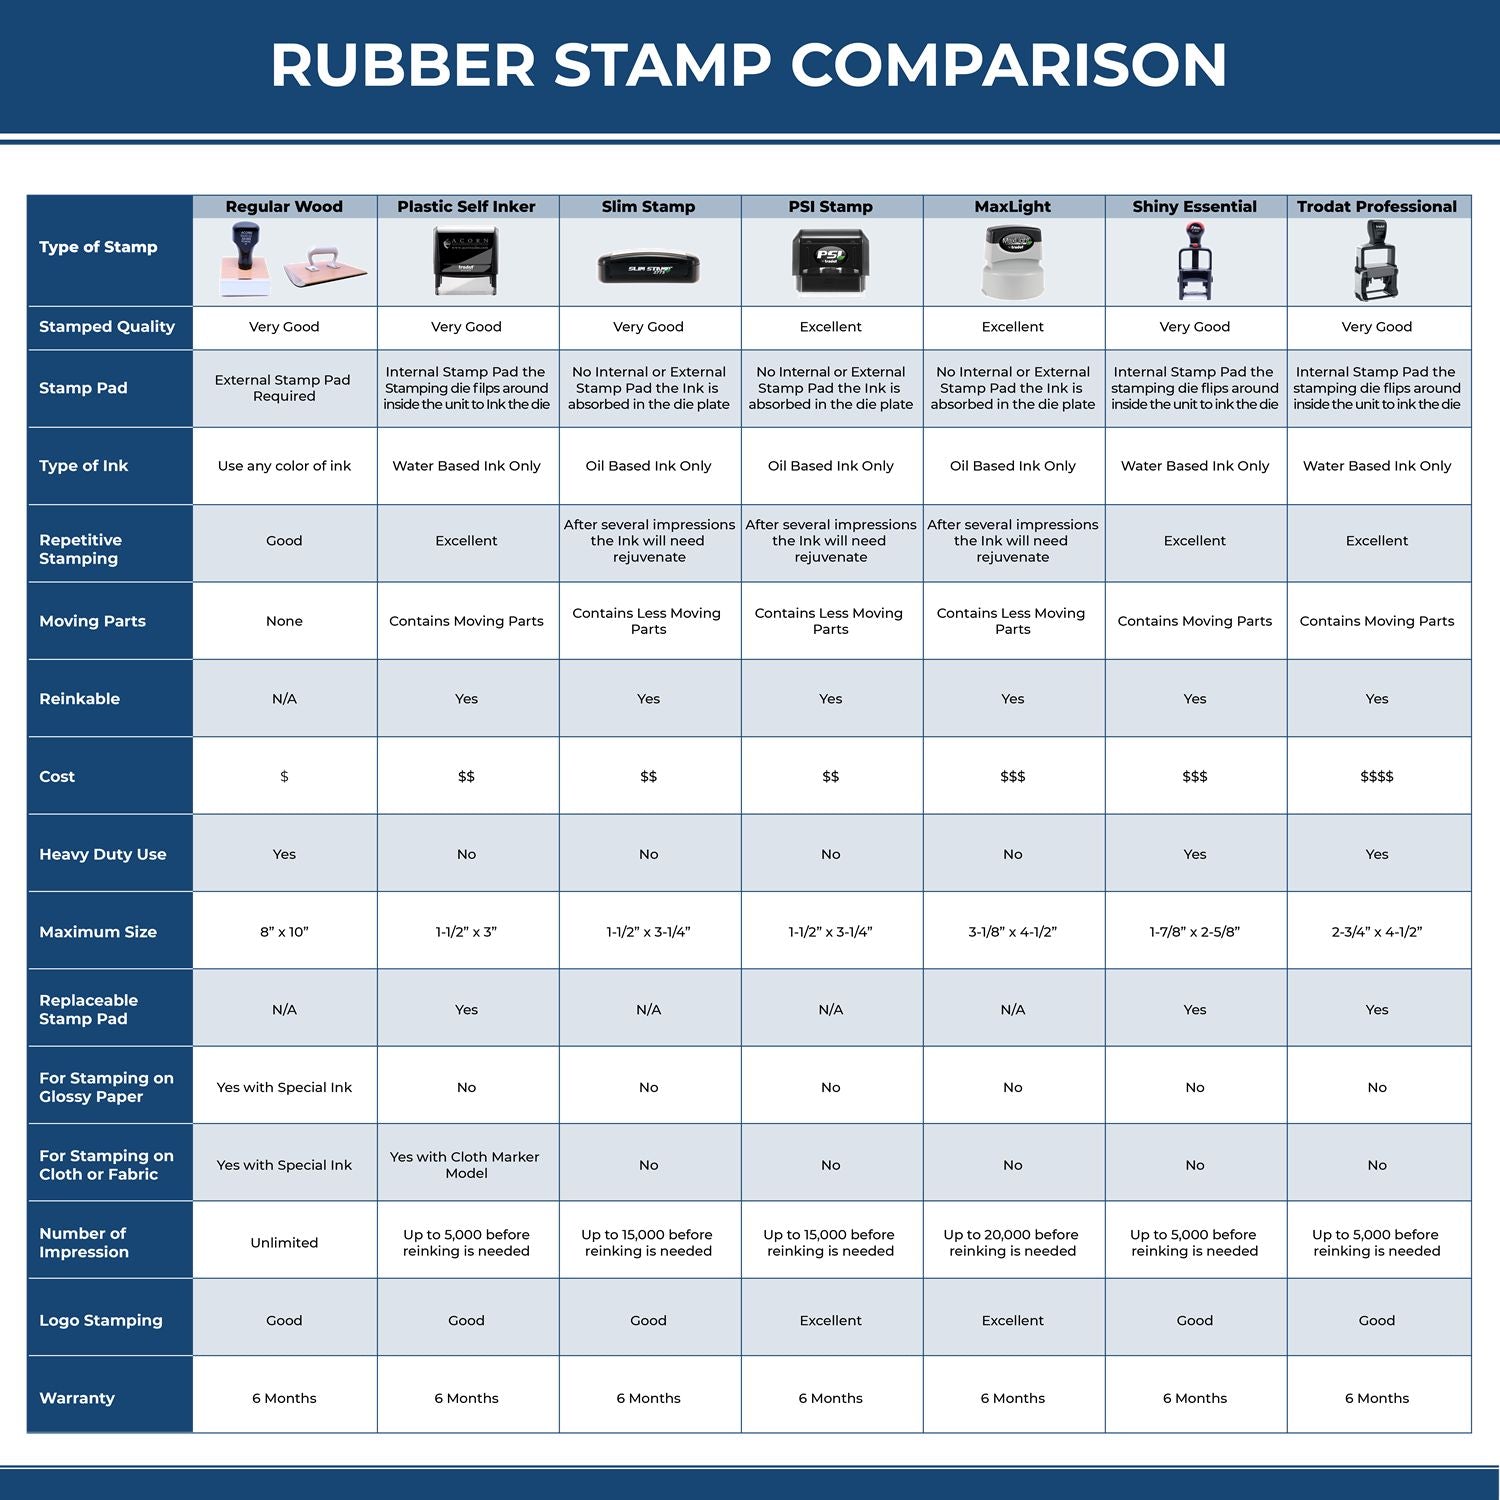 Large Self Inking Return Receipt Requested Stamp 4151S Rubber Stamp Comparison